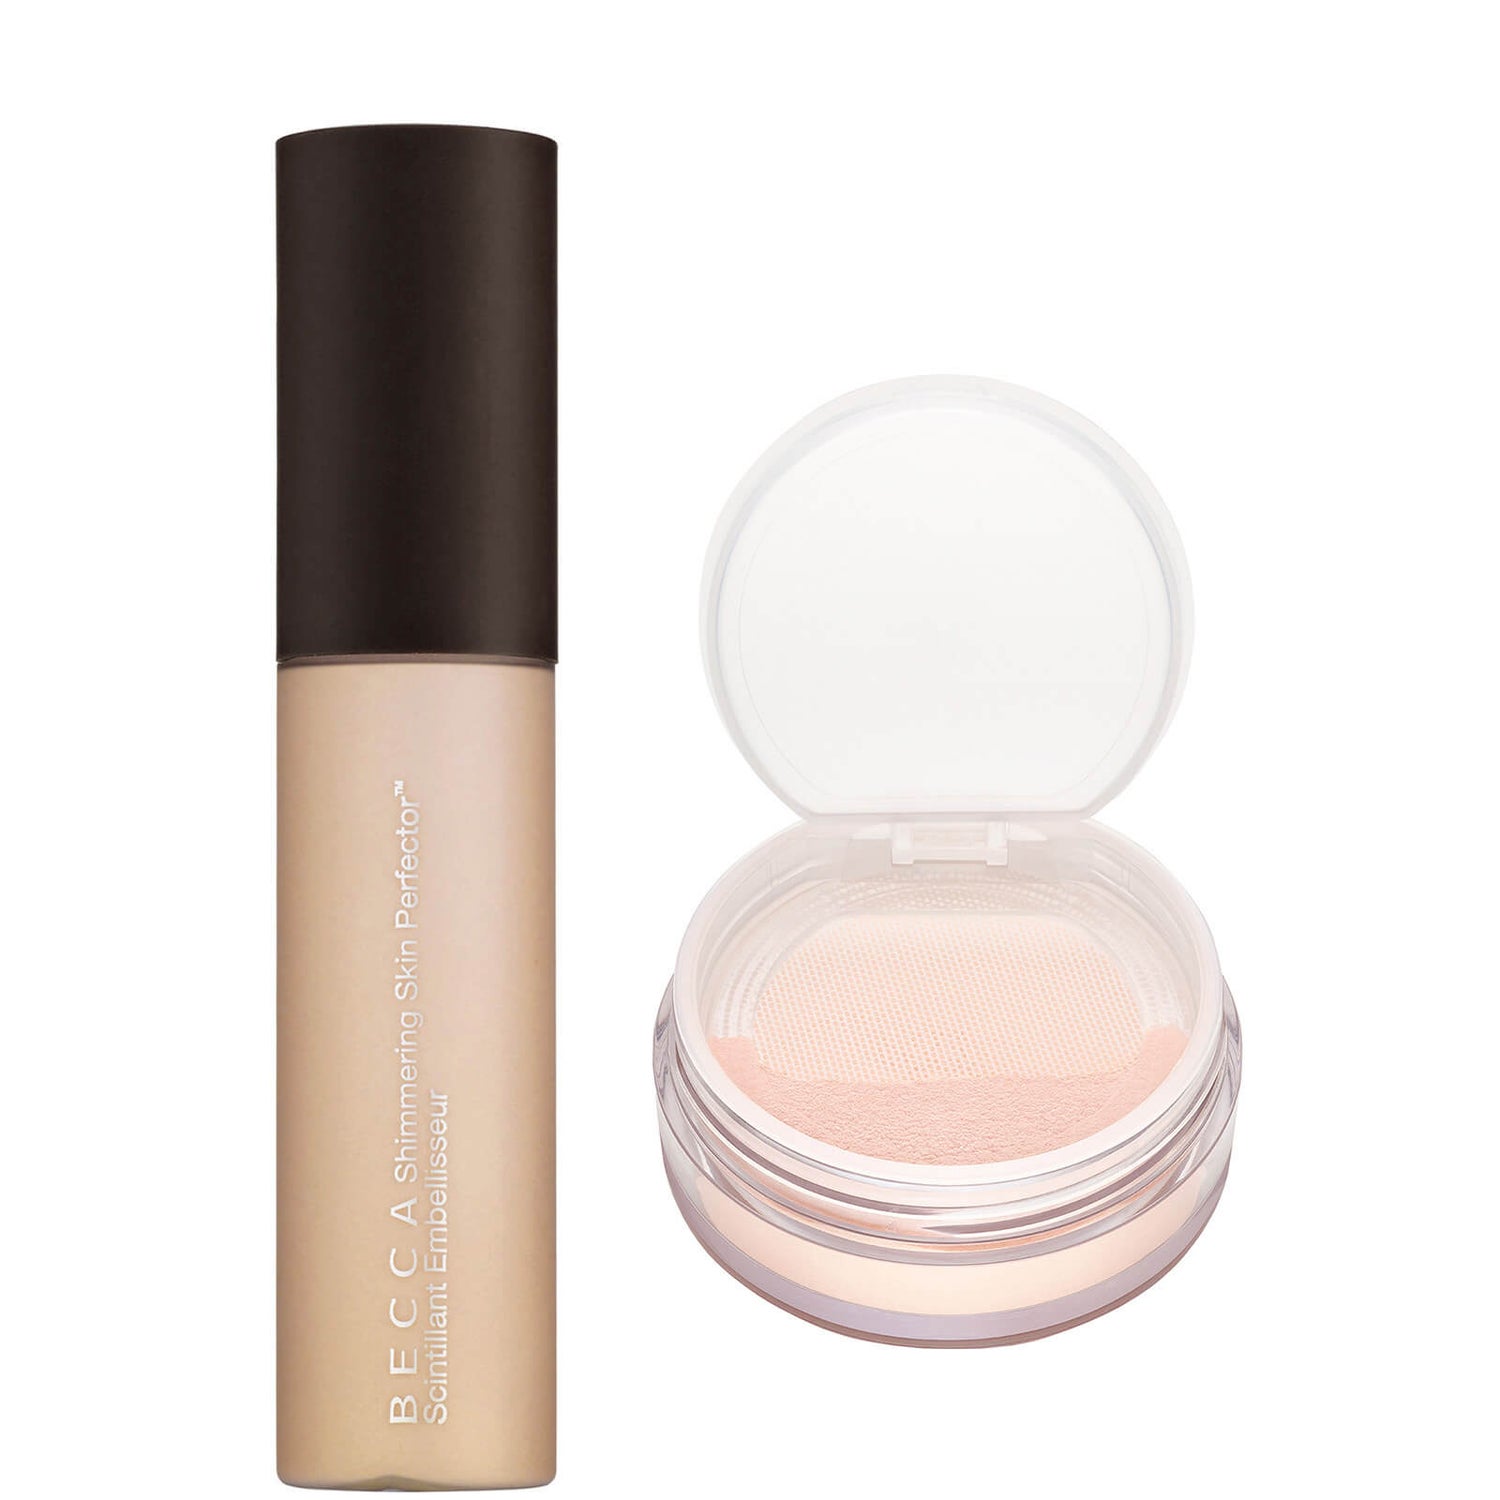 BECCA The Ultimate Set, Refresh and Glow Duo (Worth £62.00)